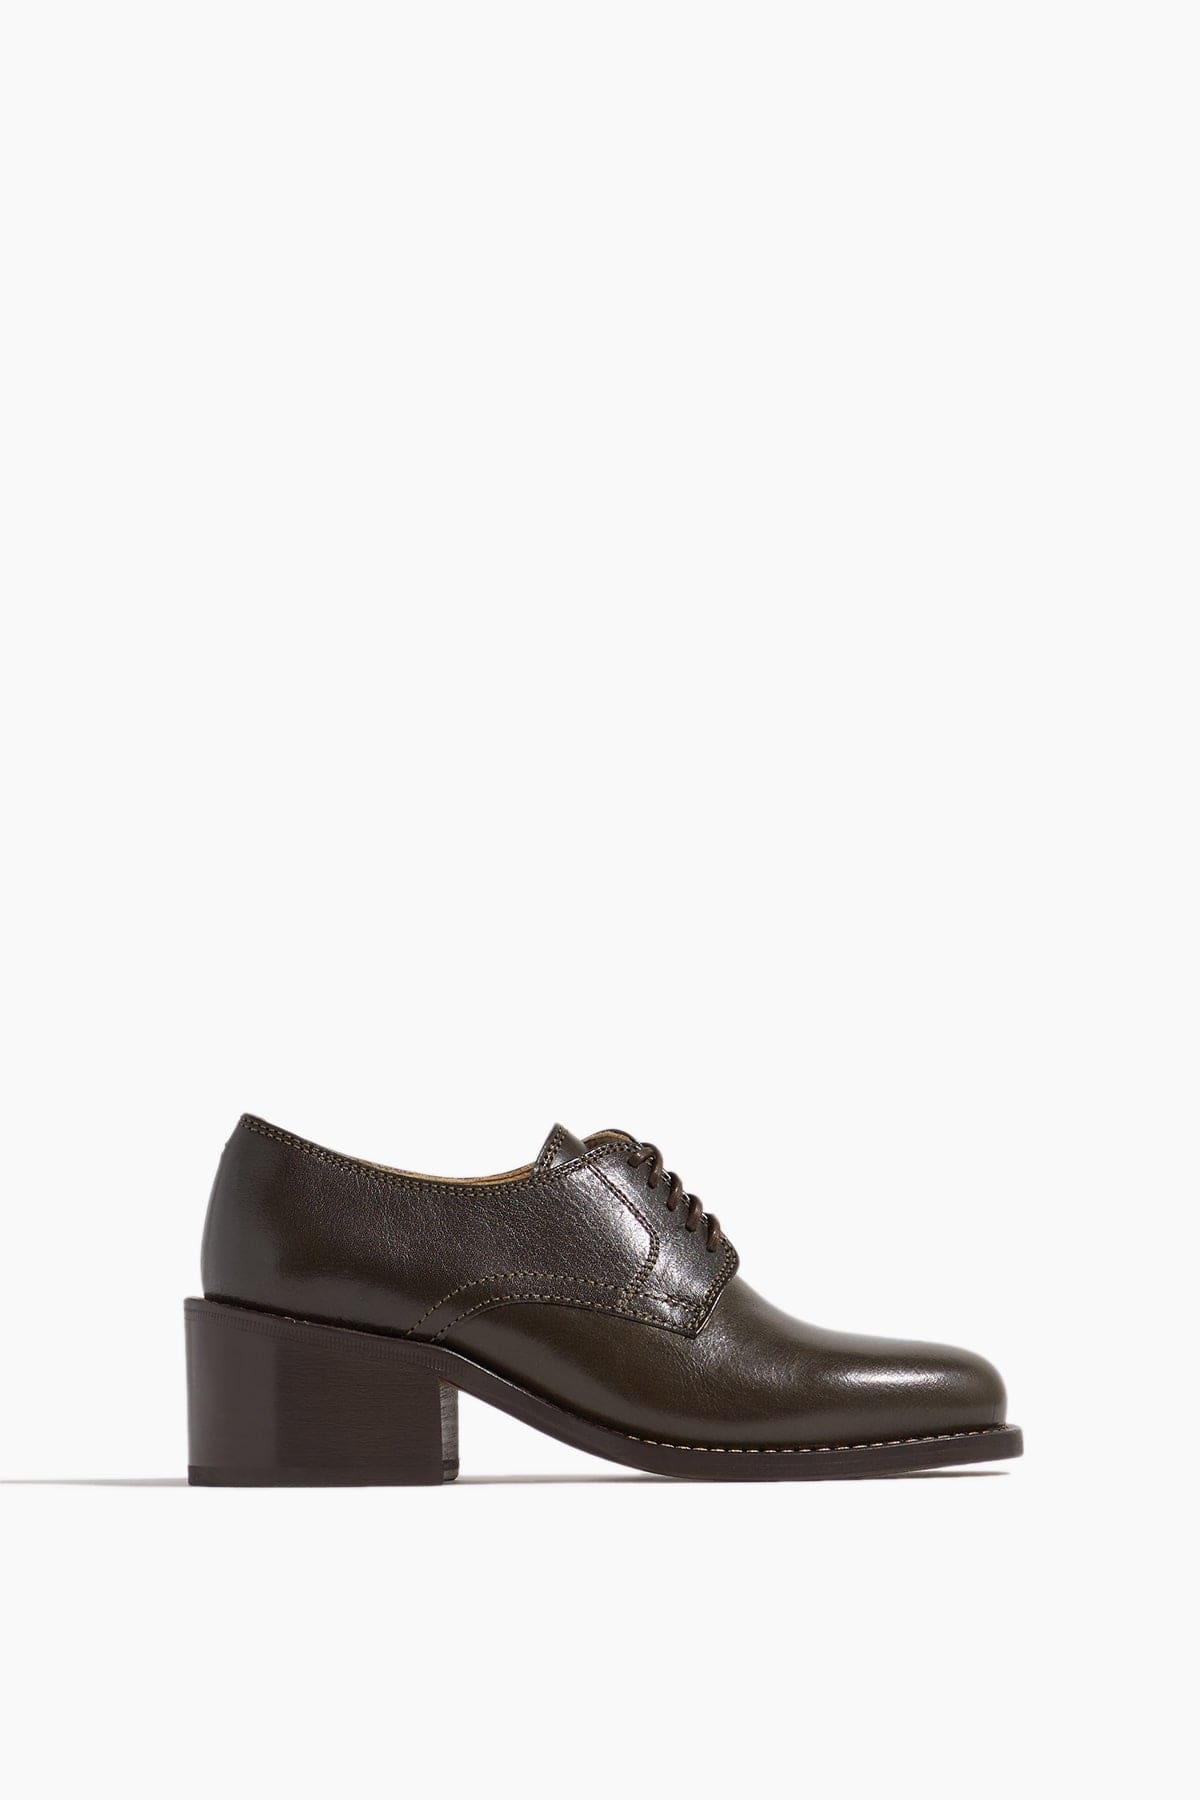 Lemaire Loafers Heeled Square Derby in Forest Brown